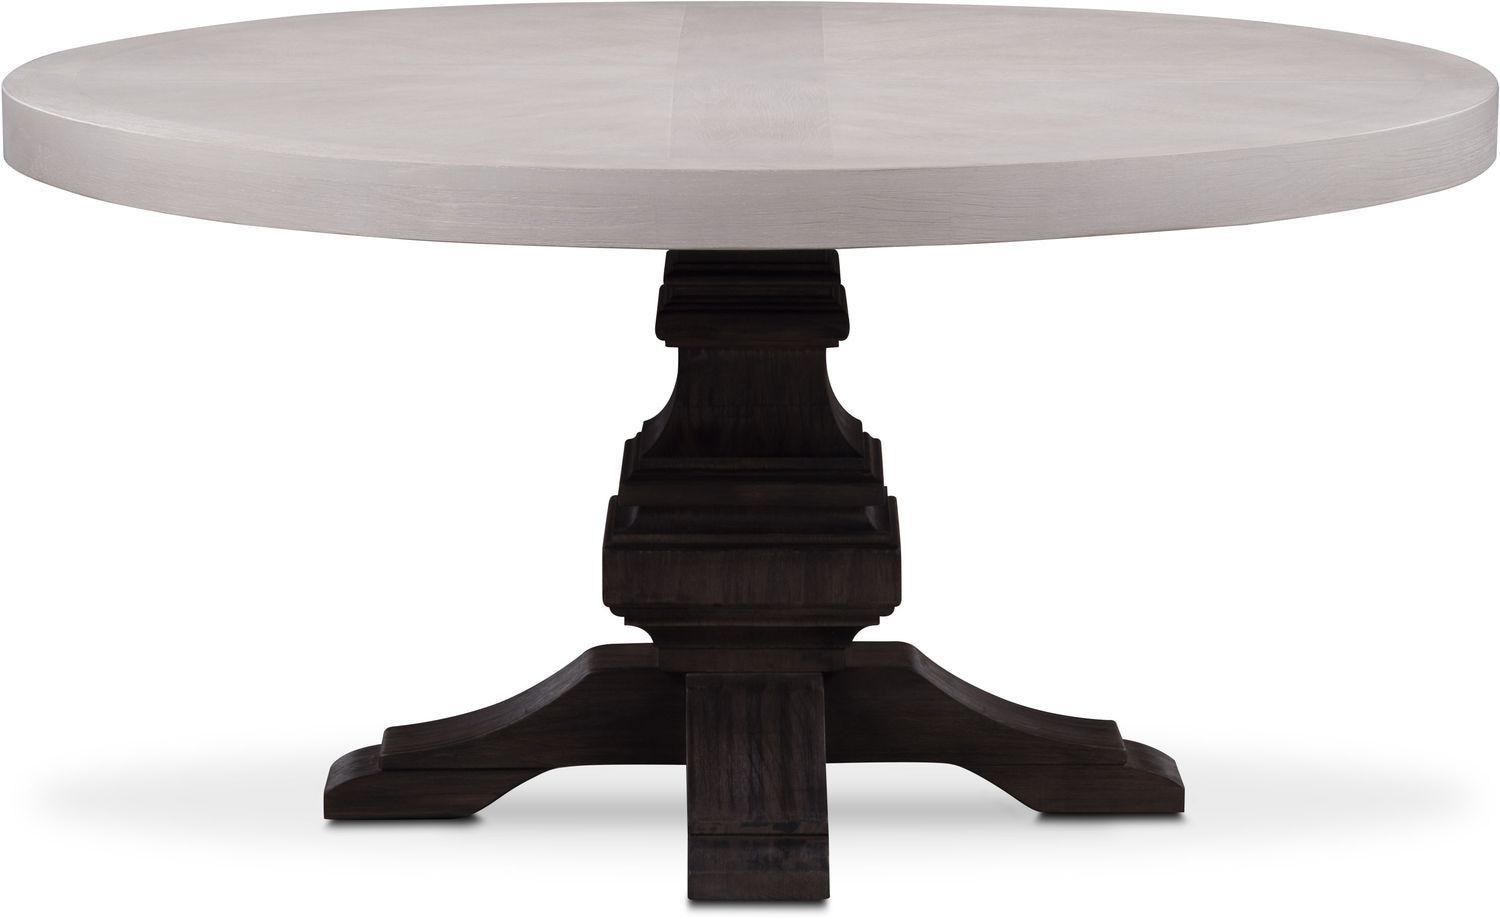 Lancaster Round Dining Table | Dining In 2019 | Round Dining Inside Current Alexandra Round Marble Pedestal Dining Tables (View 9 of 25)